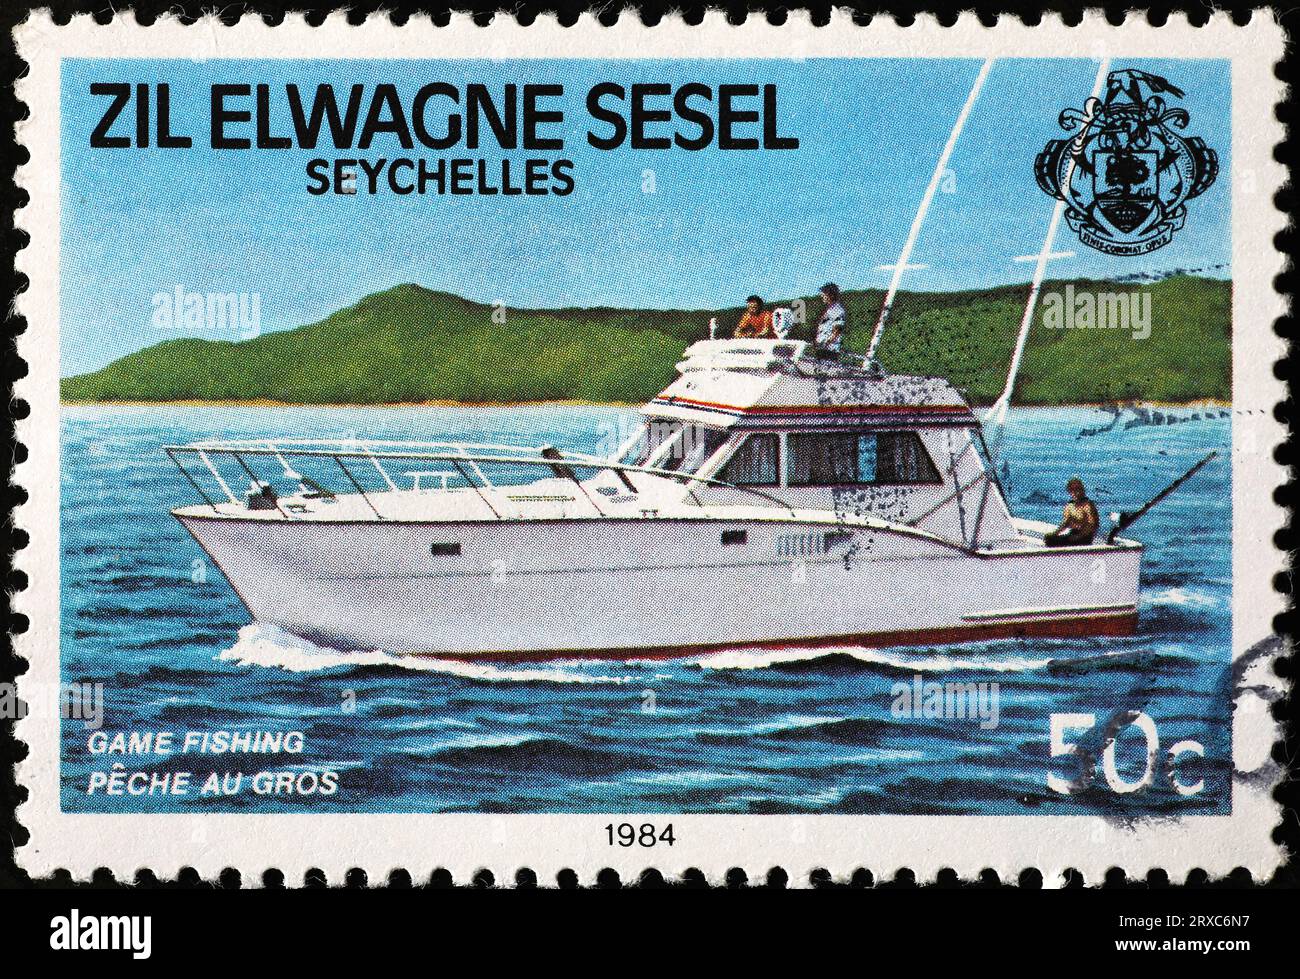 Game fishing celebration on stamp from Seychelles Stock Photo